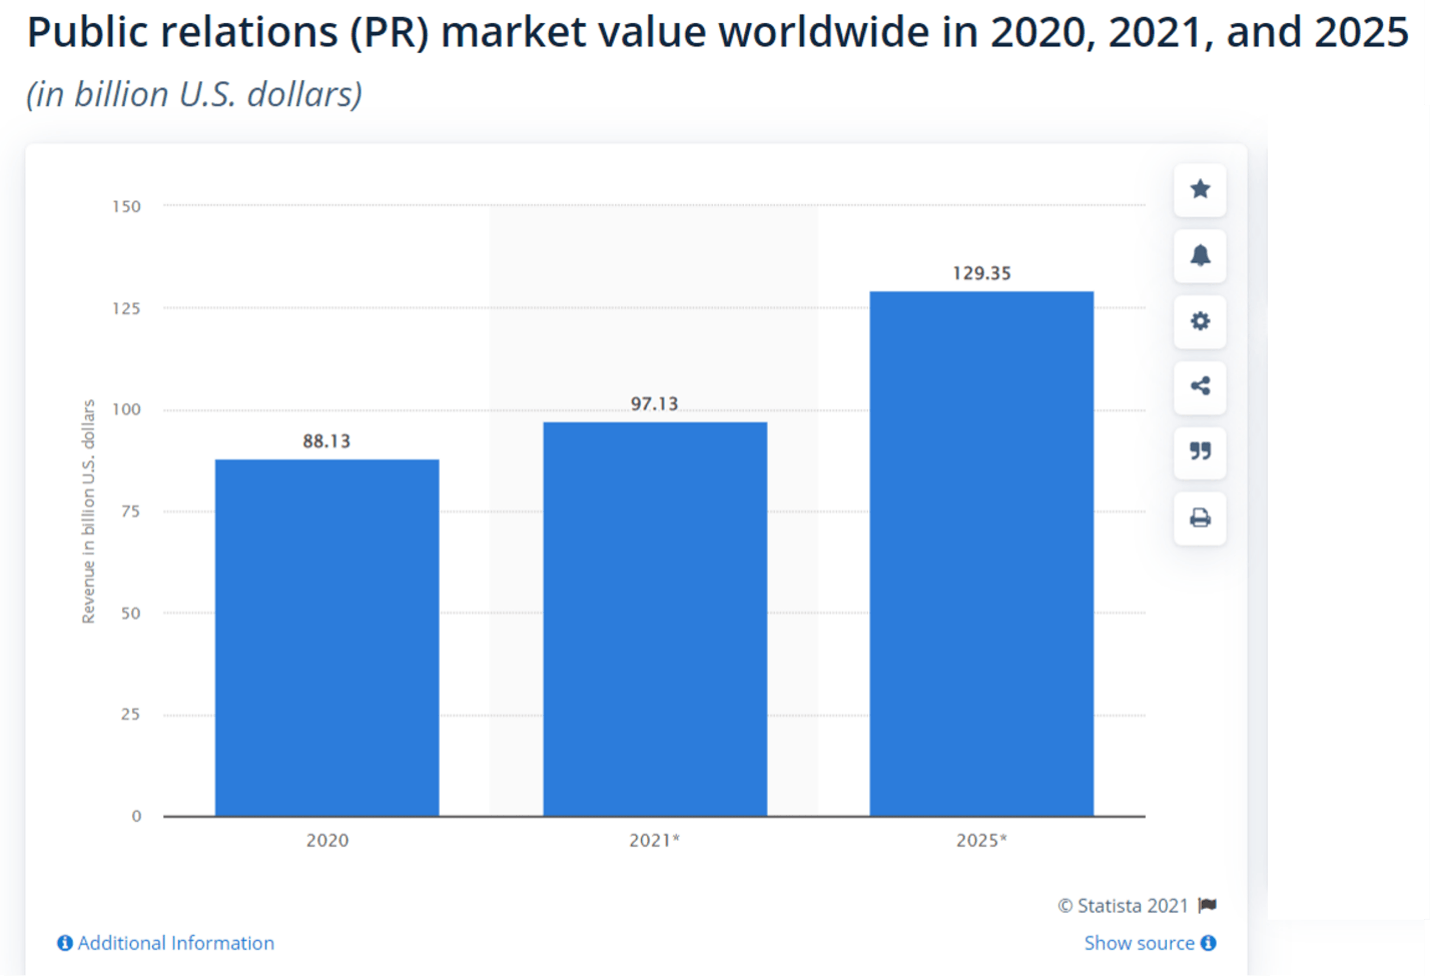 PR market value worldwide in 2020, 2021, and 2025.